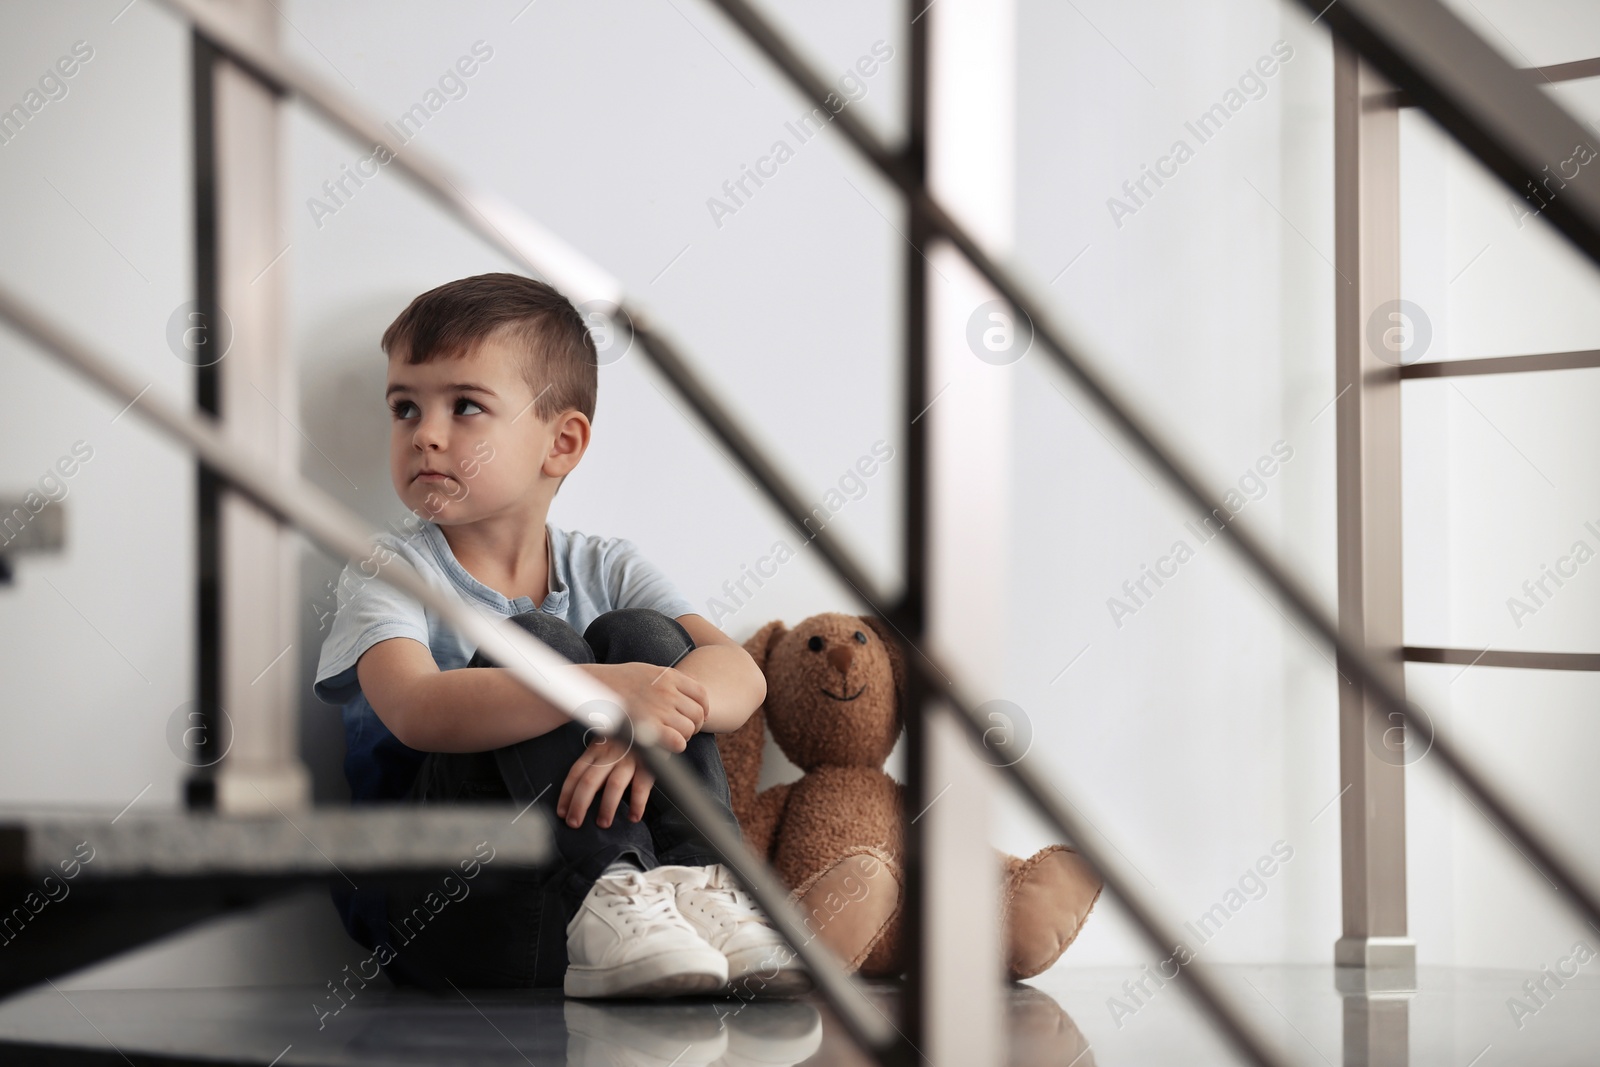 Photo of Sad little boy with toy sitting indoors